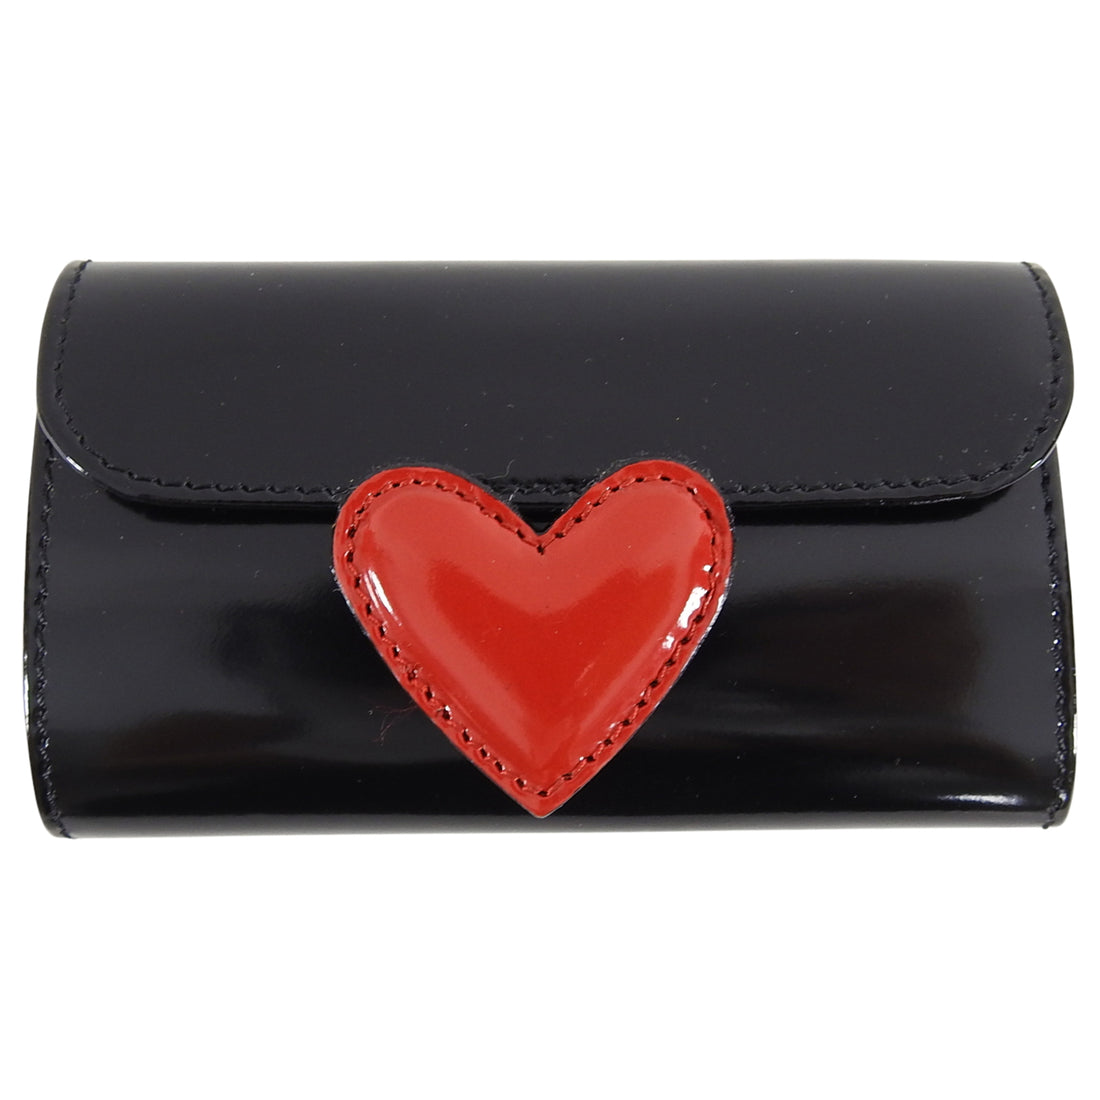 Moschino Black Leather Key Case with Red Heart - New in Box